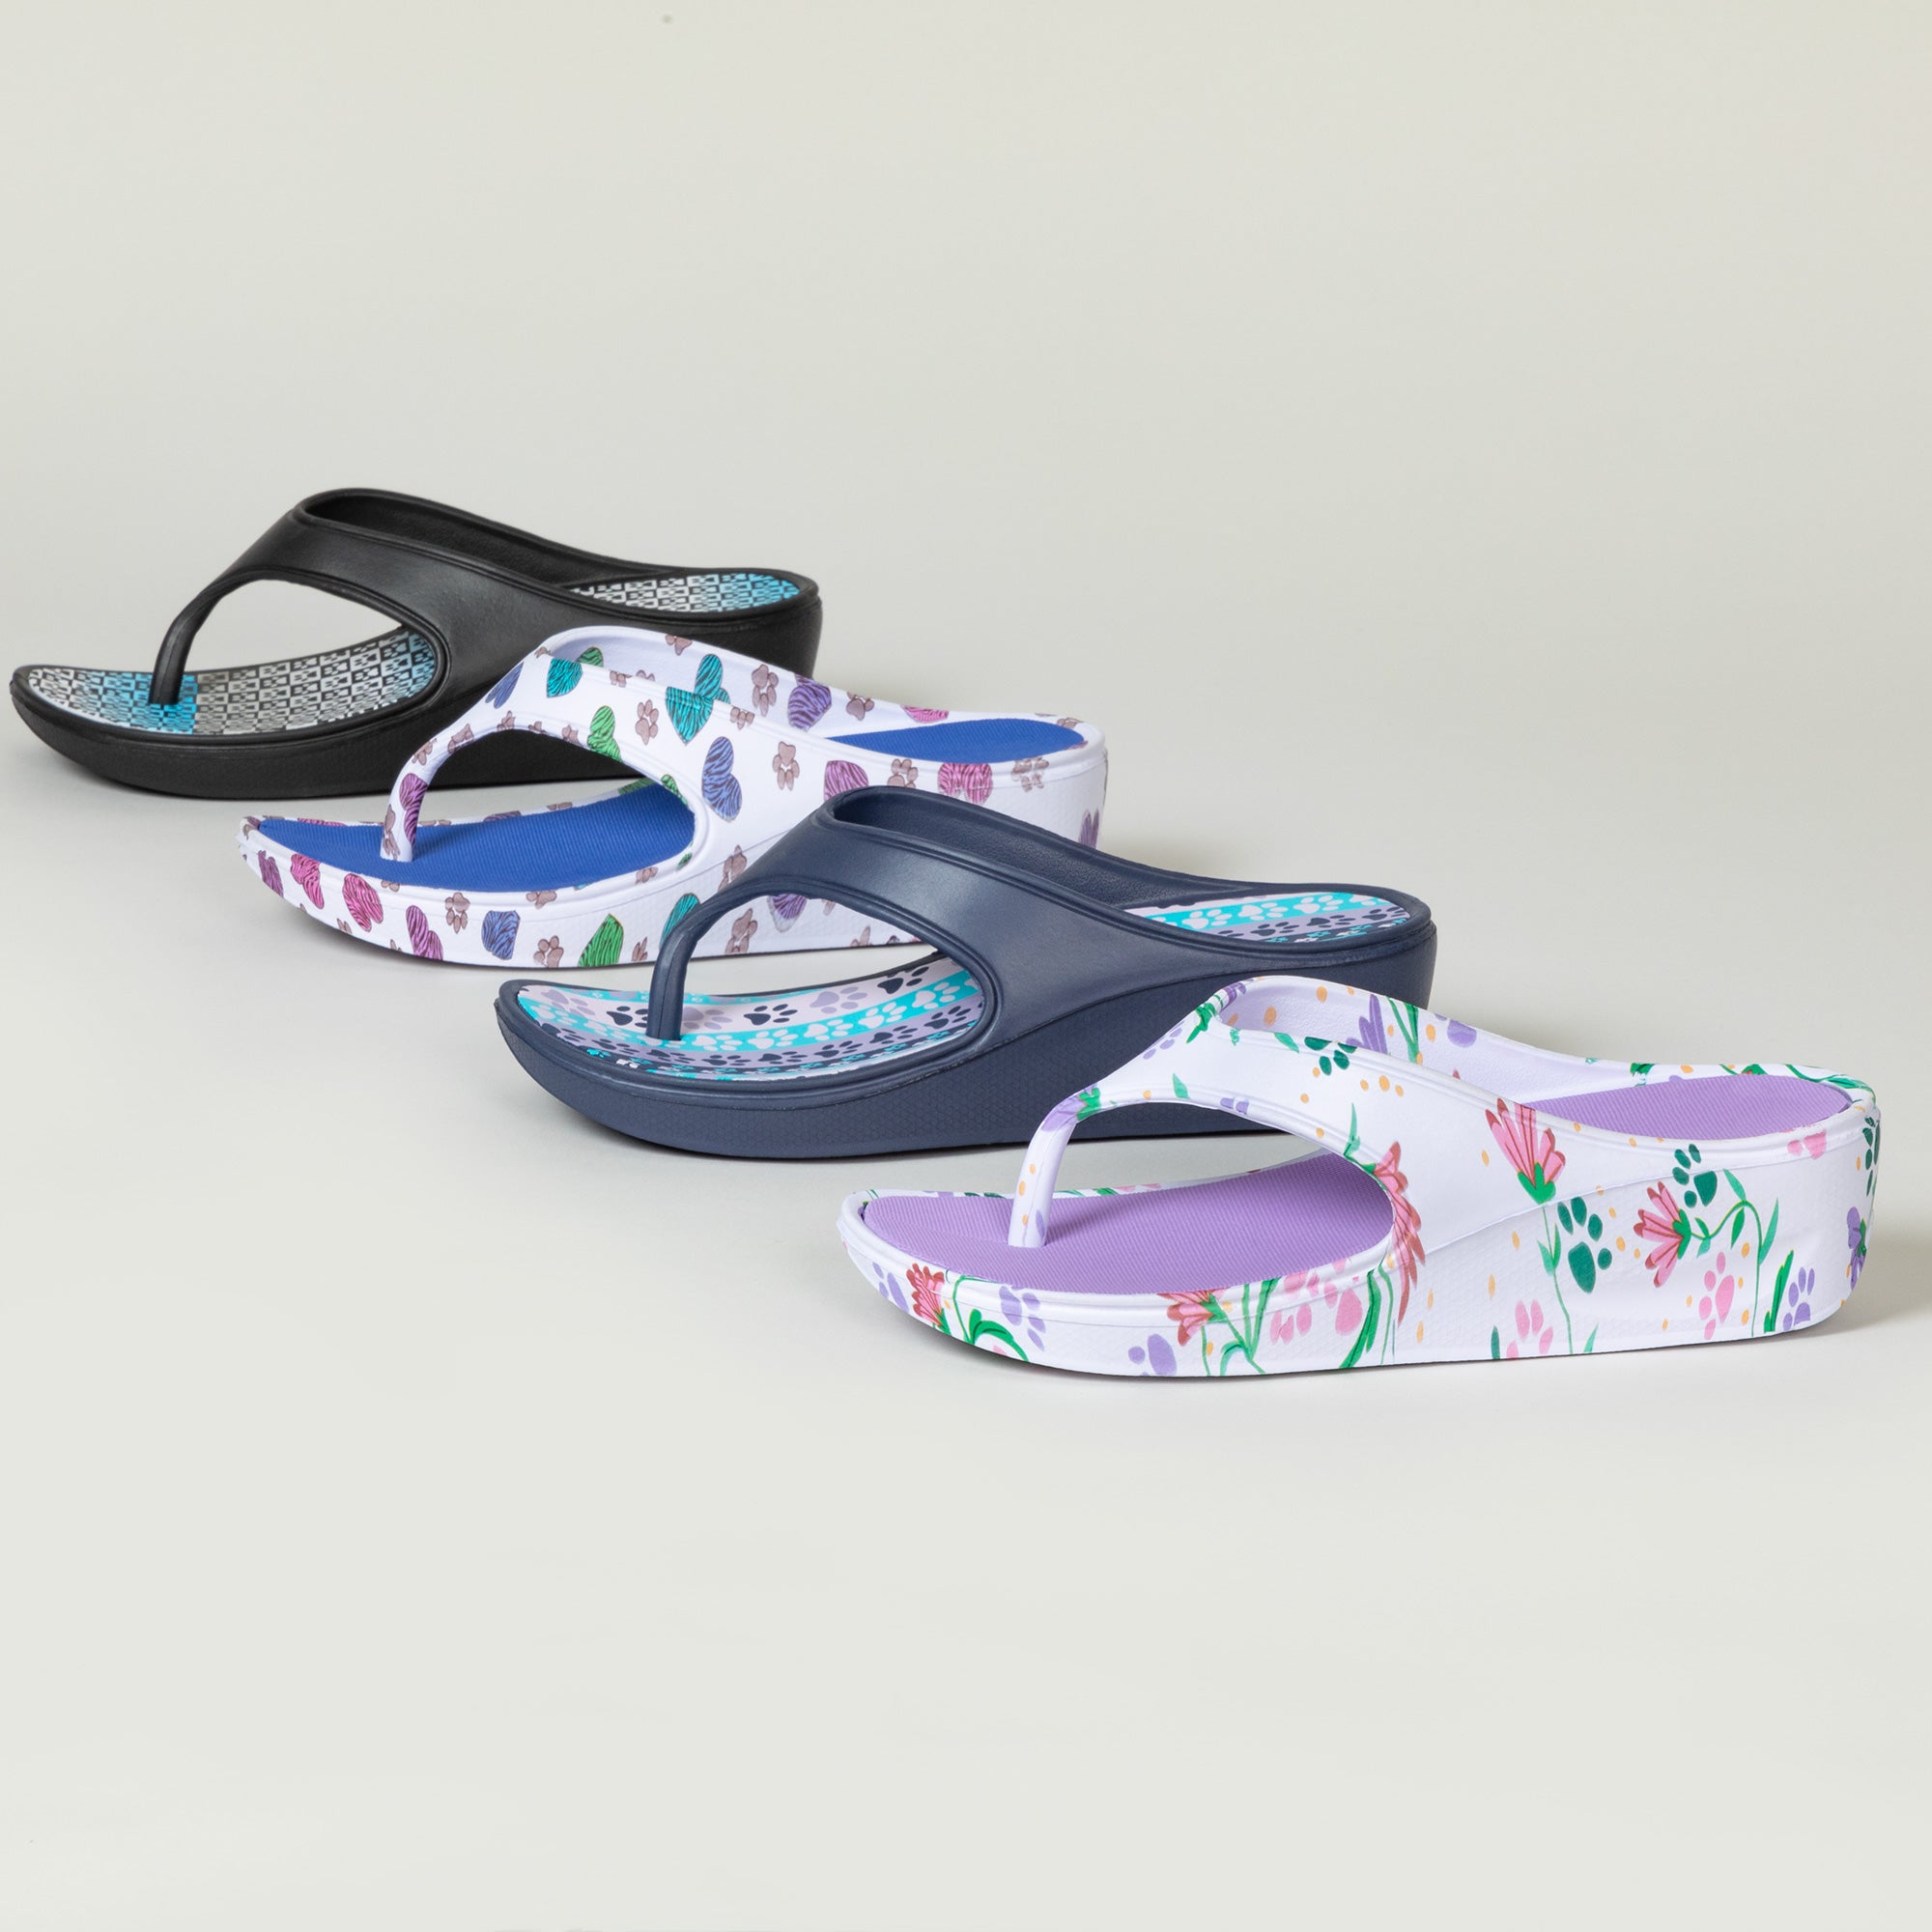 Paw Print Wedge Flip Flops - Paws & Hearts - 7